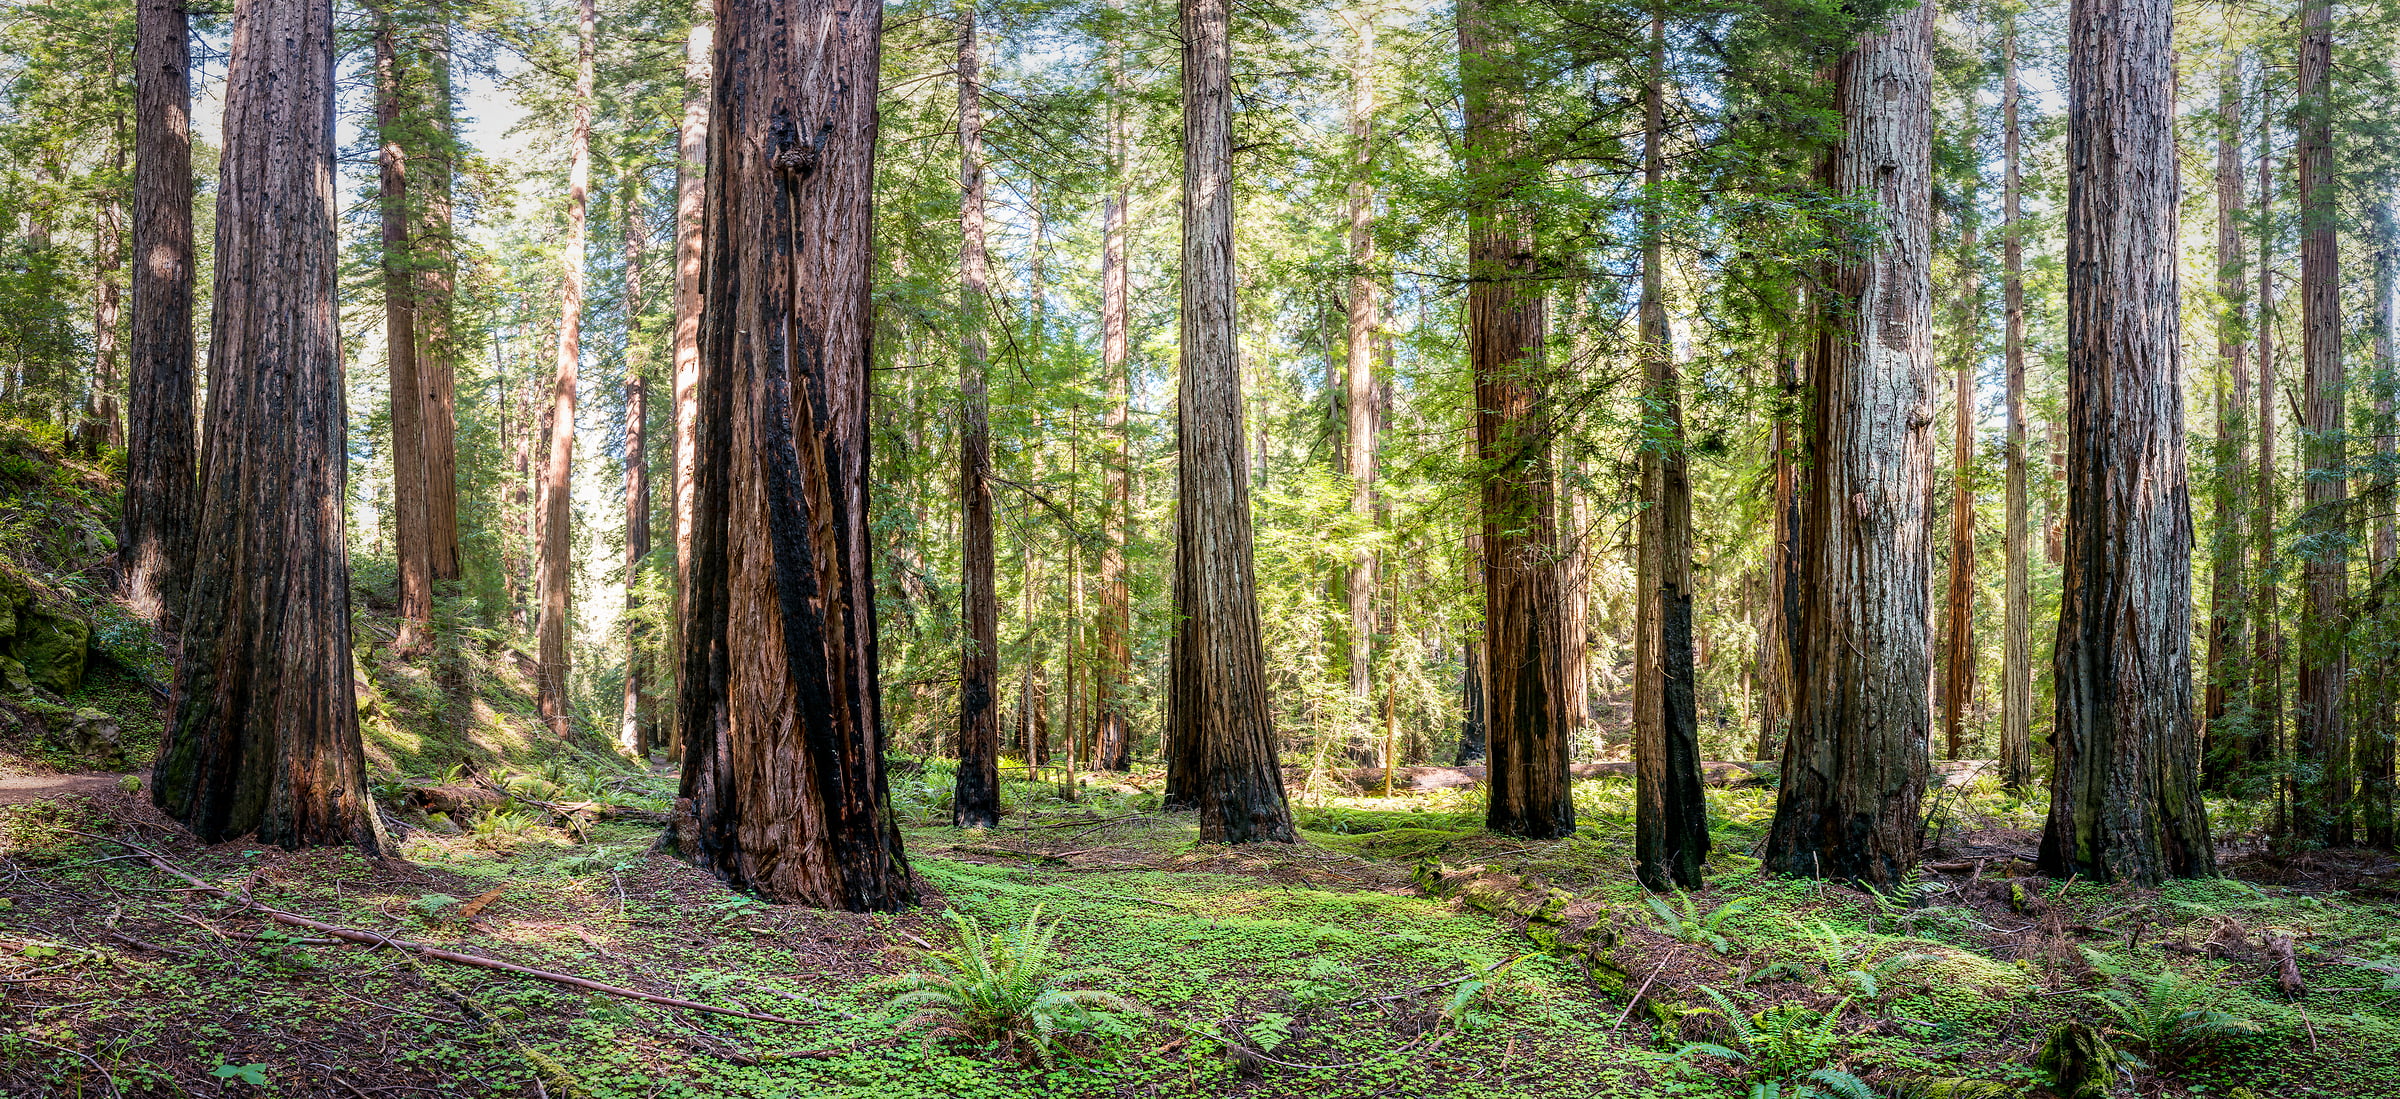 632 megapixels! A very high resolution, large-format VAST photo of a redwood forest; fine art nature photo created by Justin Katz in Montgomery Woods State Reserve, California.